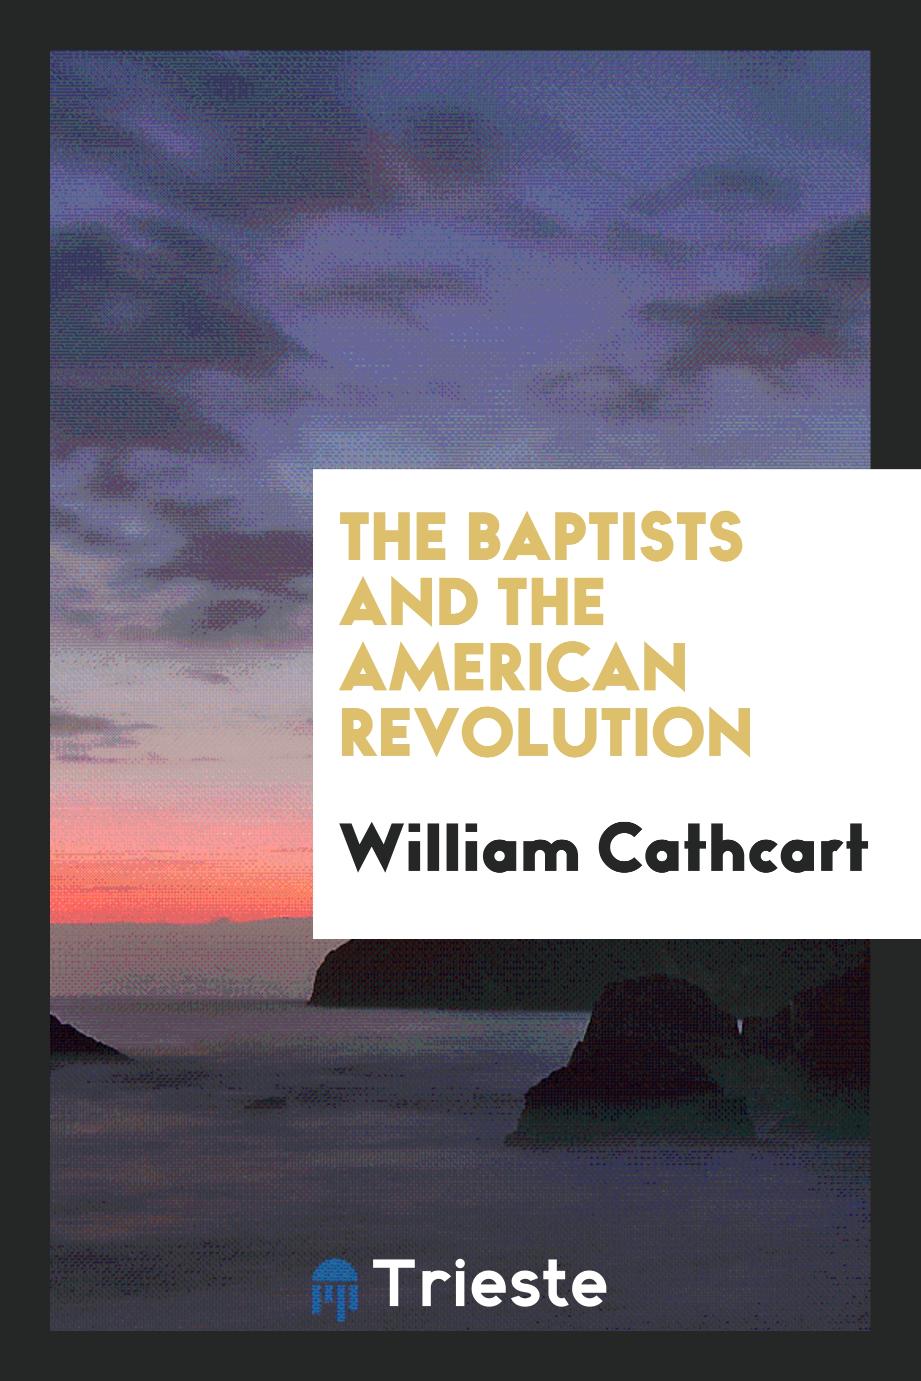 The Baptists and the American revolution